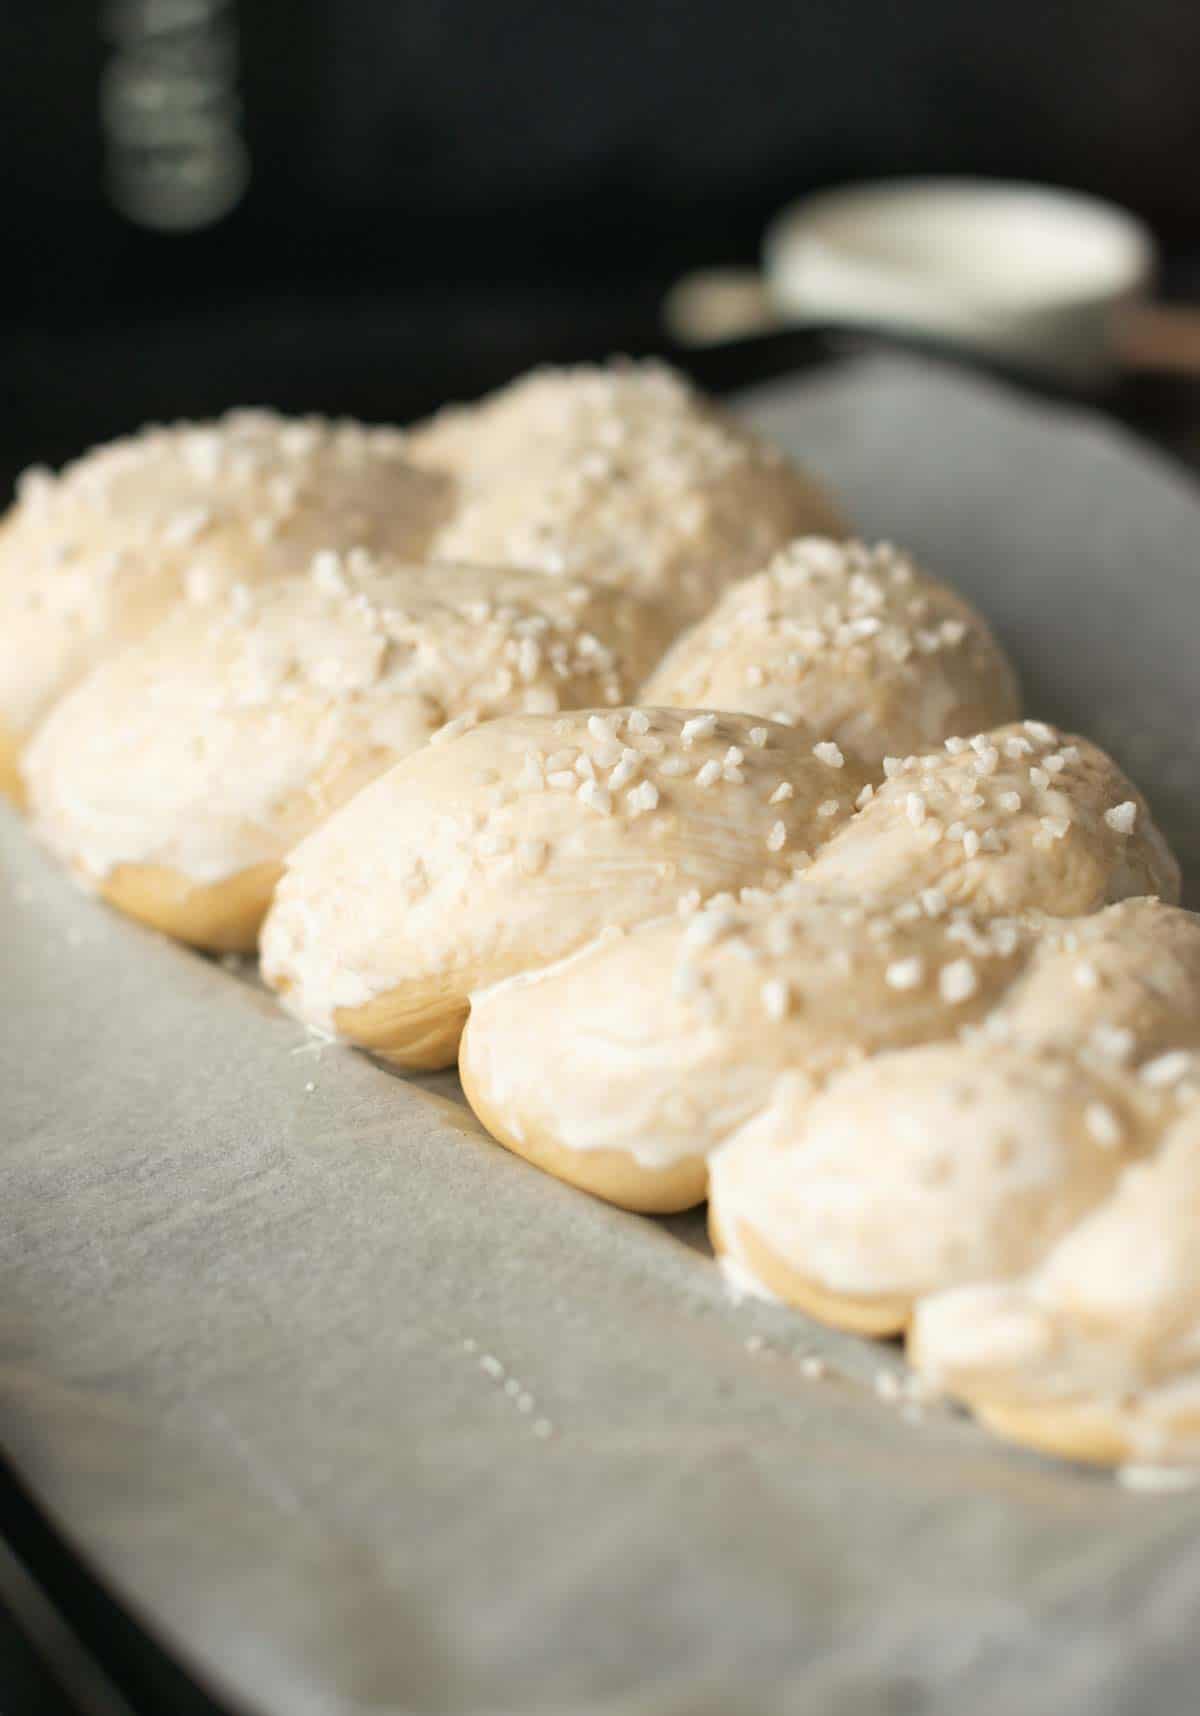 Picture: Bread braided, brushed with soy cream and topped with pearl sugar